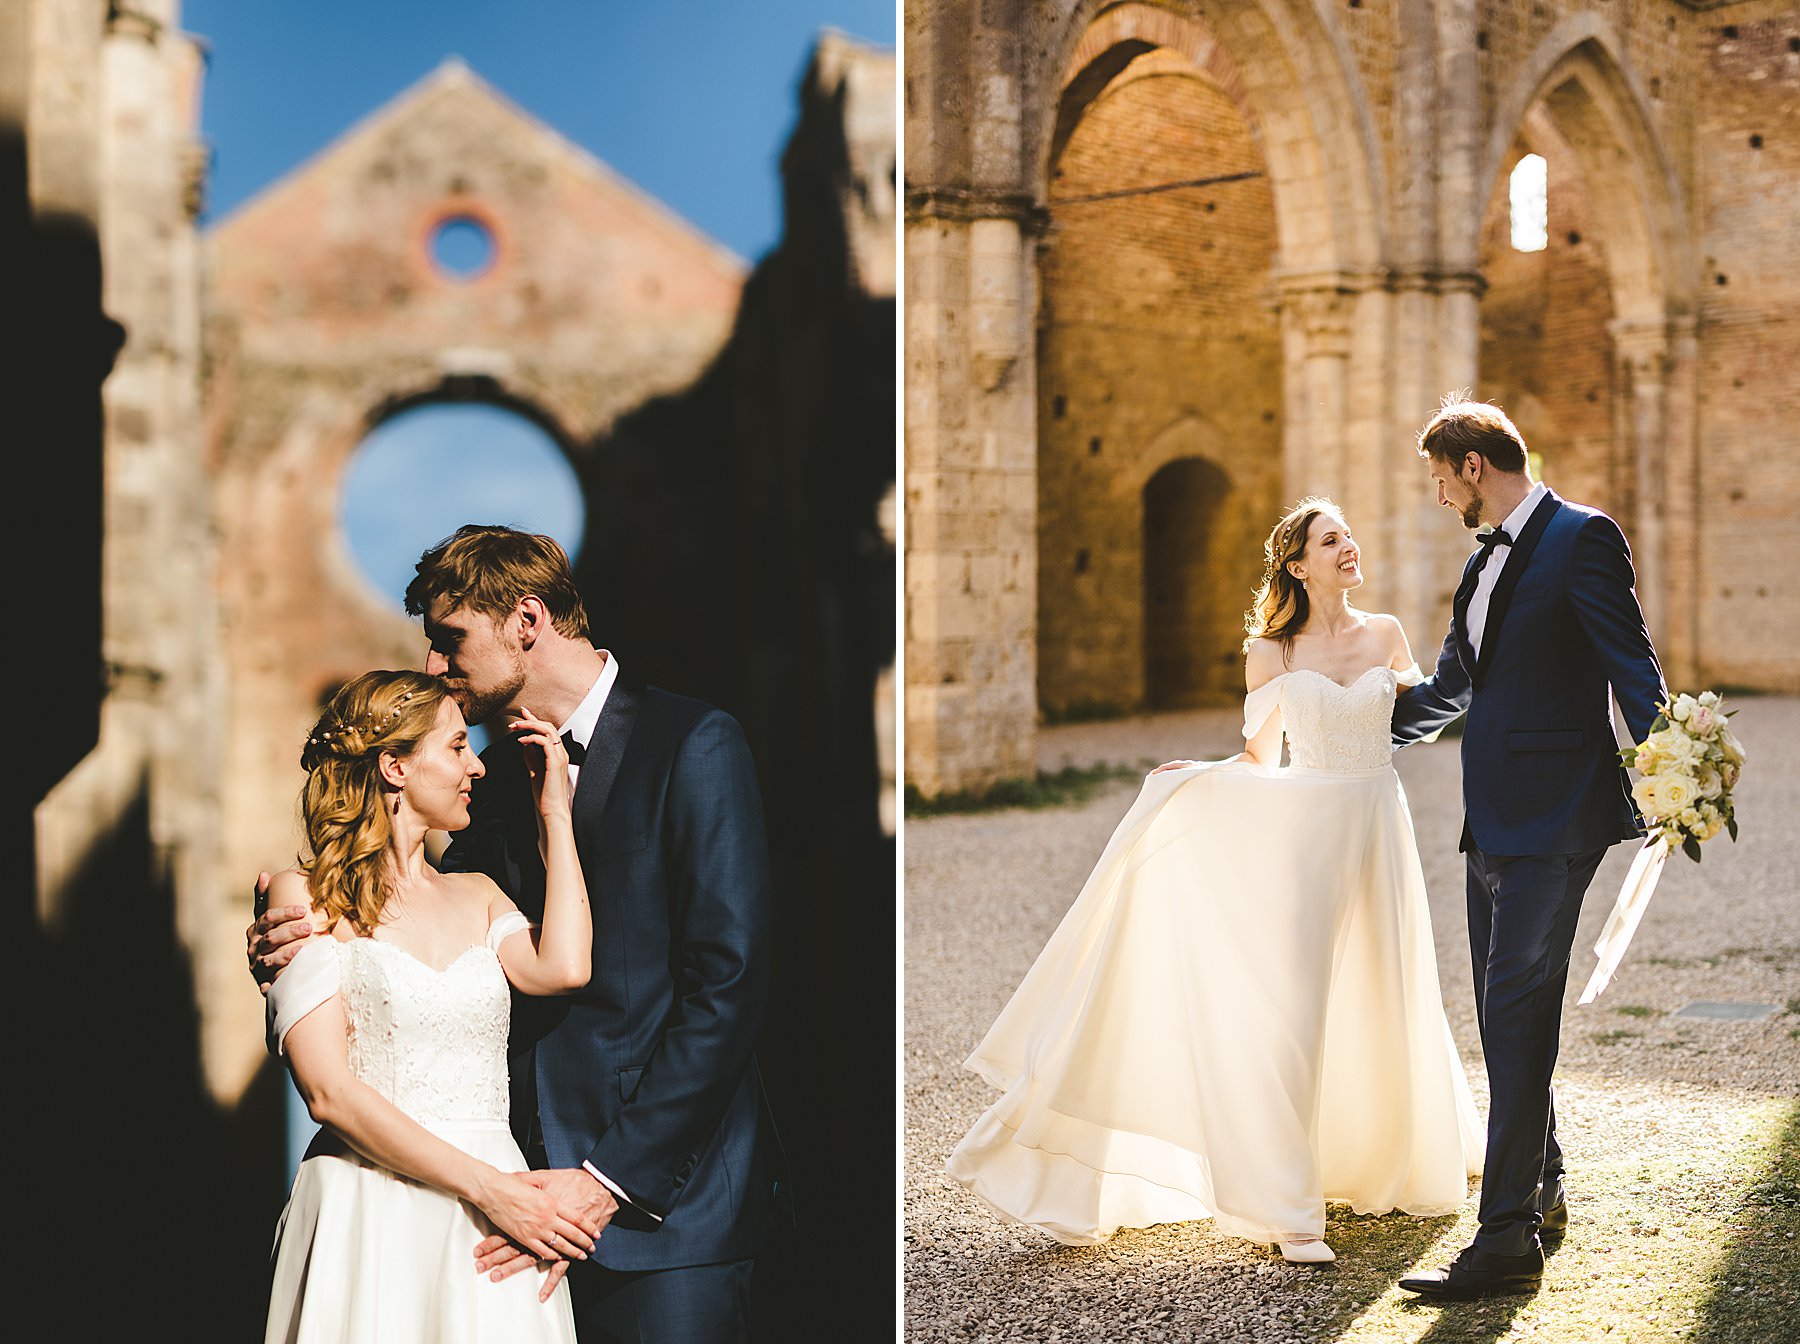 Destination wedding photography in countryside of Tuscany at Abbey of San Galgano